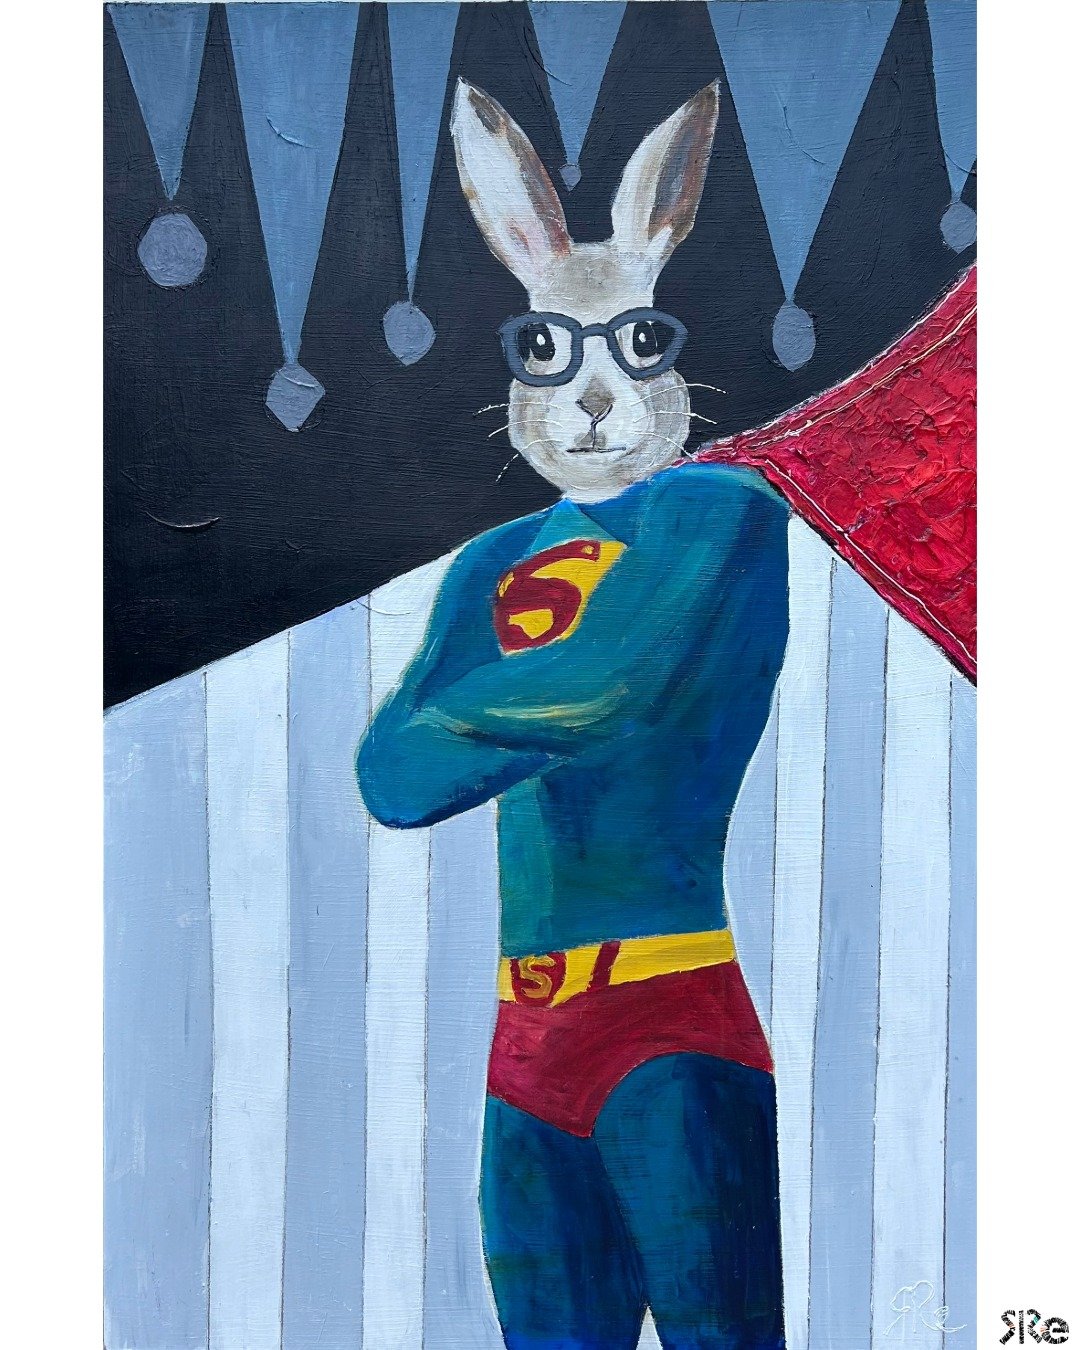 &ldquo;The Caped Crusader&rdquo; waits for a call to help find Fabio.

More characters to come - stay tuned to see the saga unravel!

This painting measures 24&rdquo; x 36&rdquo; x 1 5/8&rdquo; on a birch wood panel.

Tap the 🔗 in the bio to view th